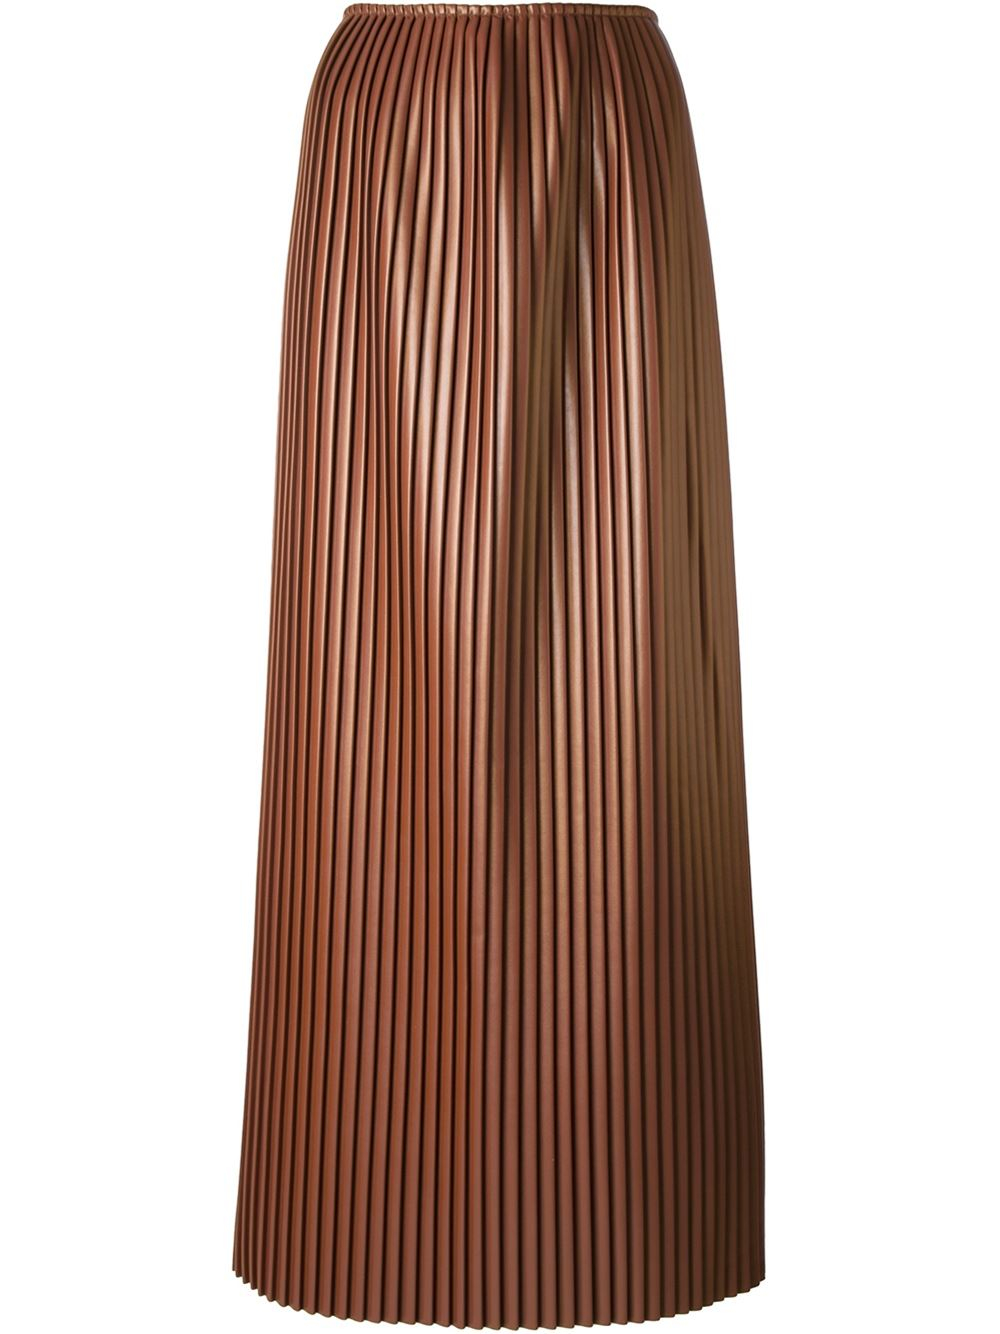 MSGM Long Pleated Skirt in Brown - Lyst